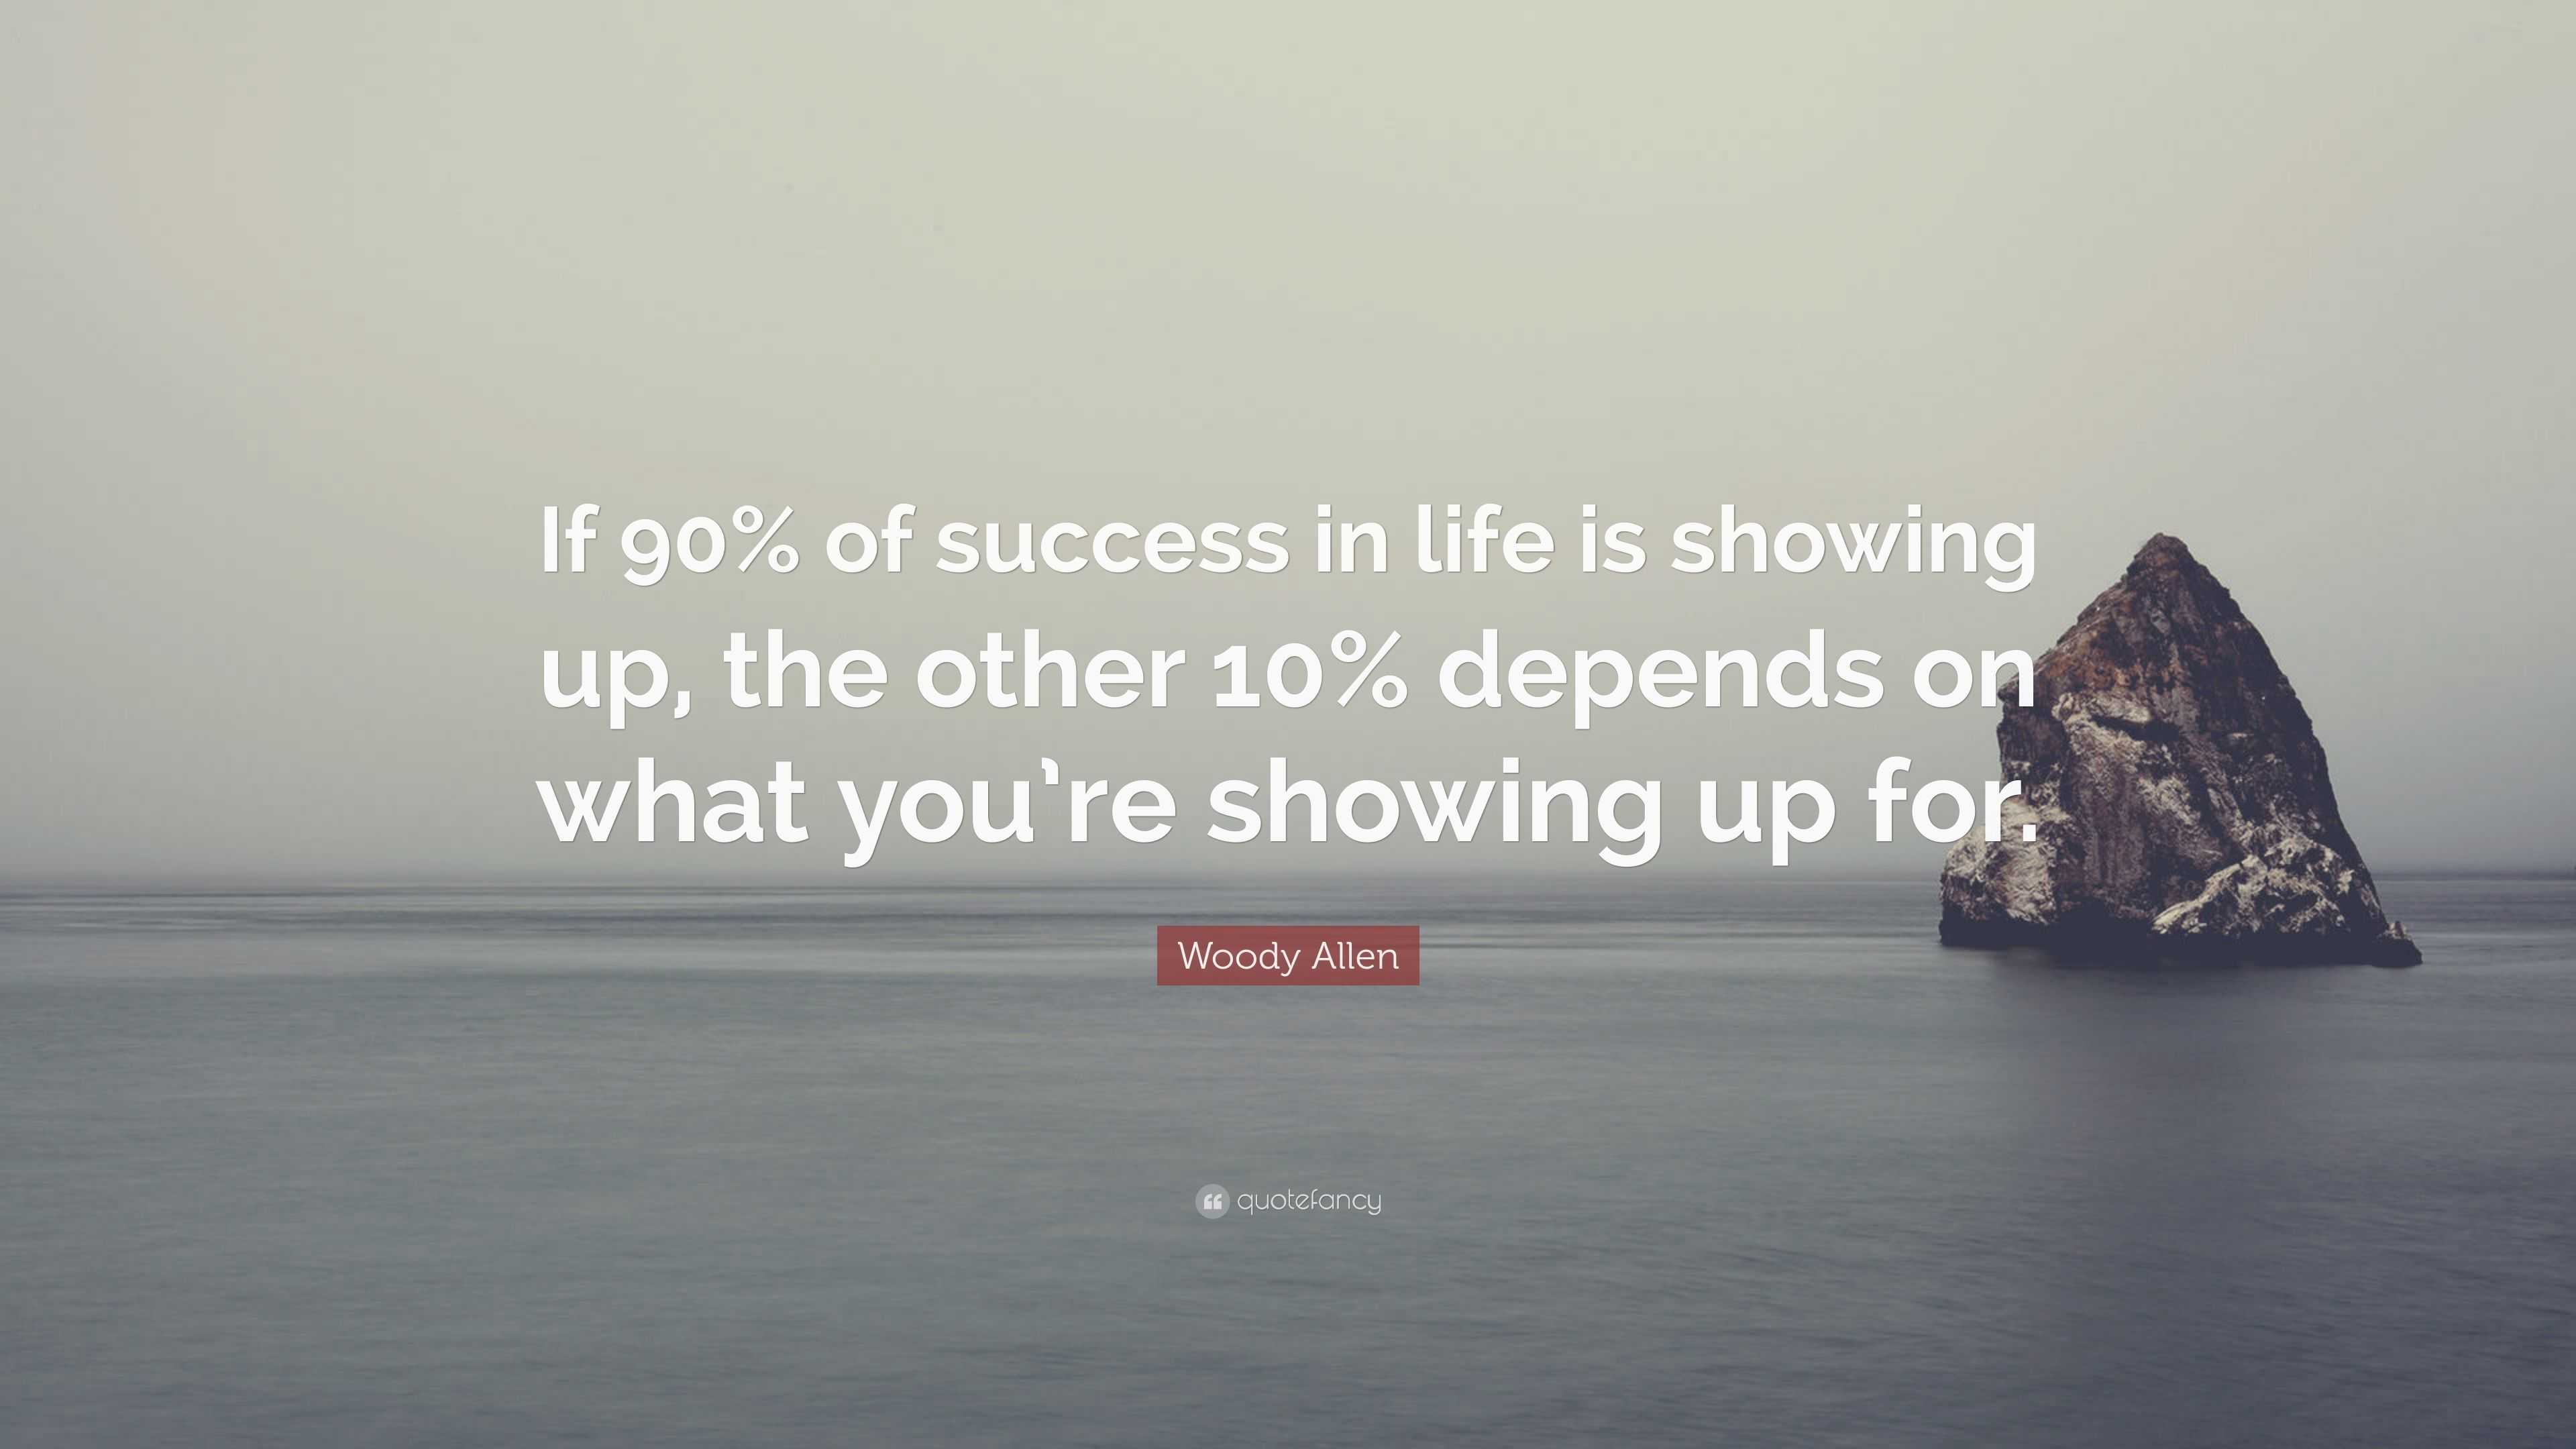 Woody Allen Quote: “If 90% of success in life is showing up, the other ...